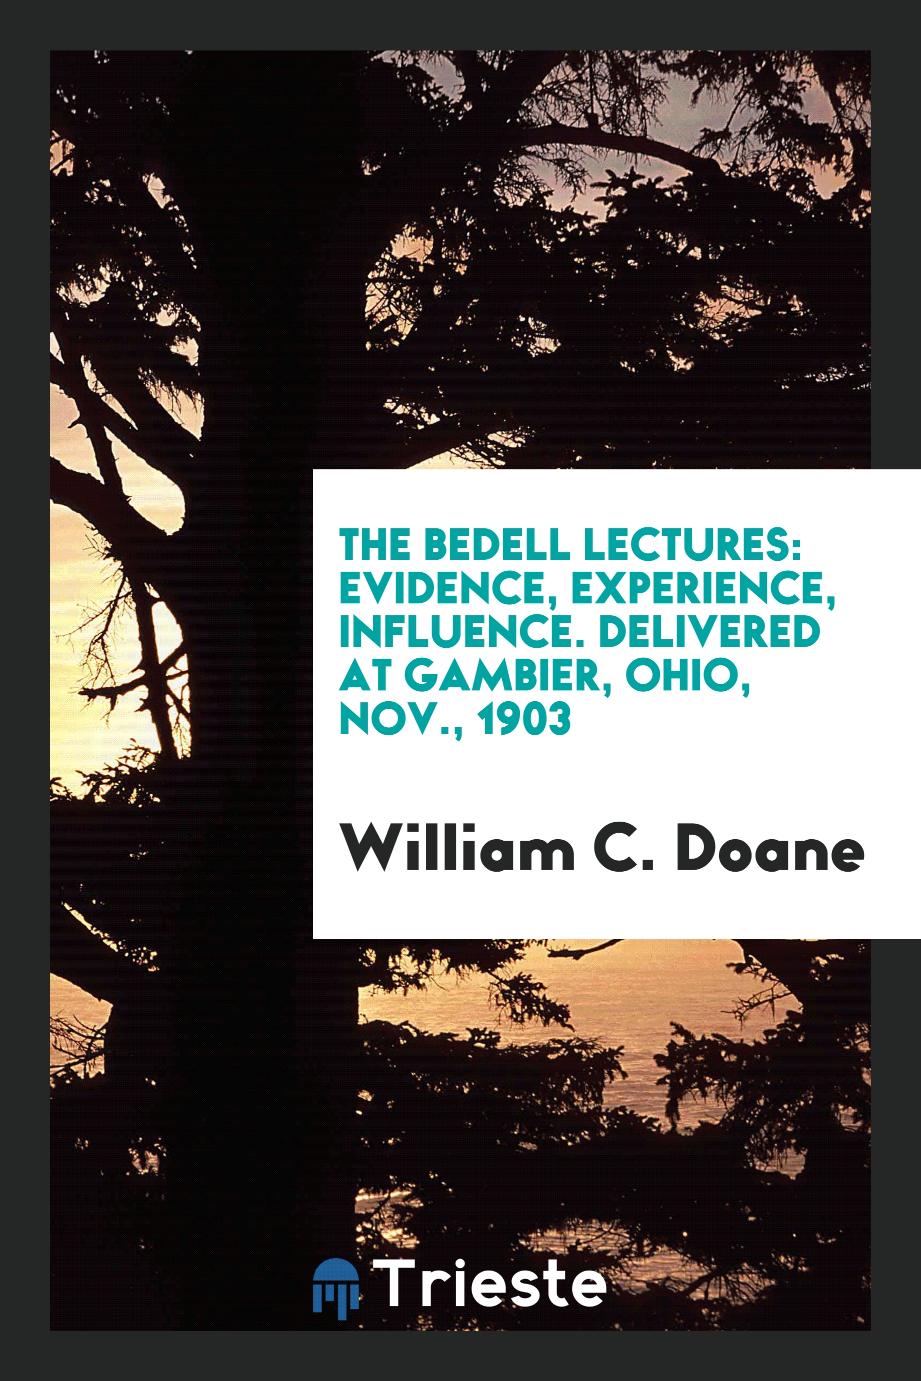 The bedell lectures: Evidence, experience, influence. Delivered at Gambier, Ohio, Nov., 1903